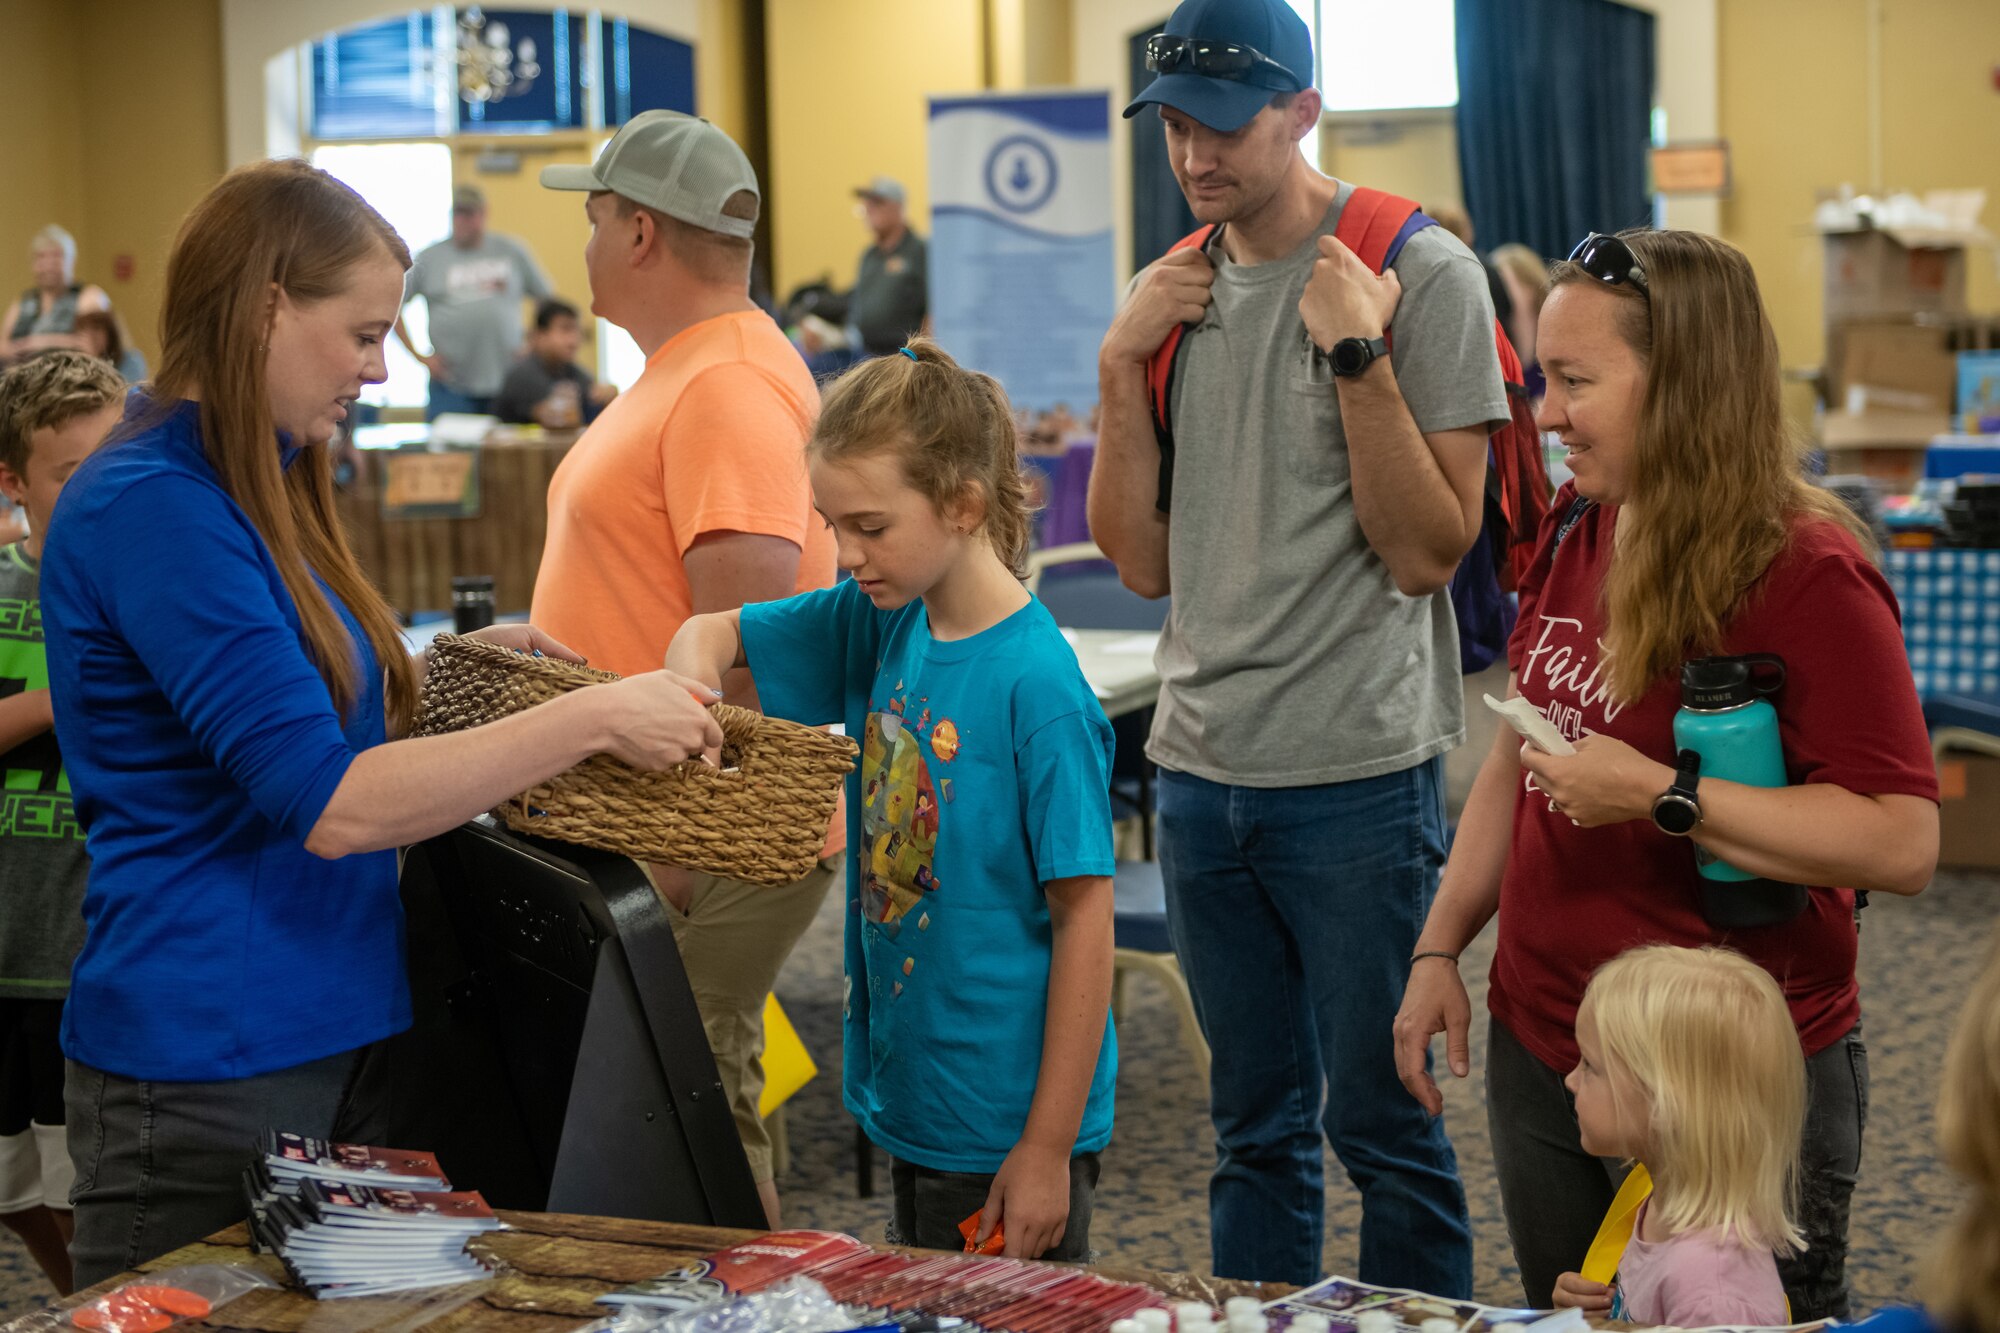 A family from the local area visits Ellsworth Air Force Base, S.D., for the ‘Back 2 School
Roundup” July 30, 2022.